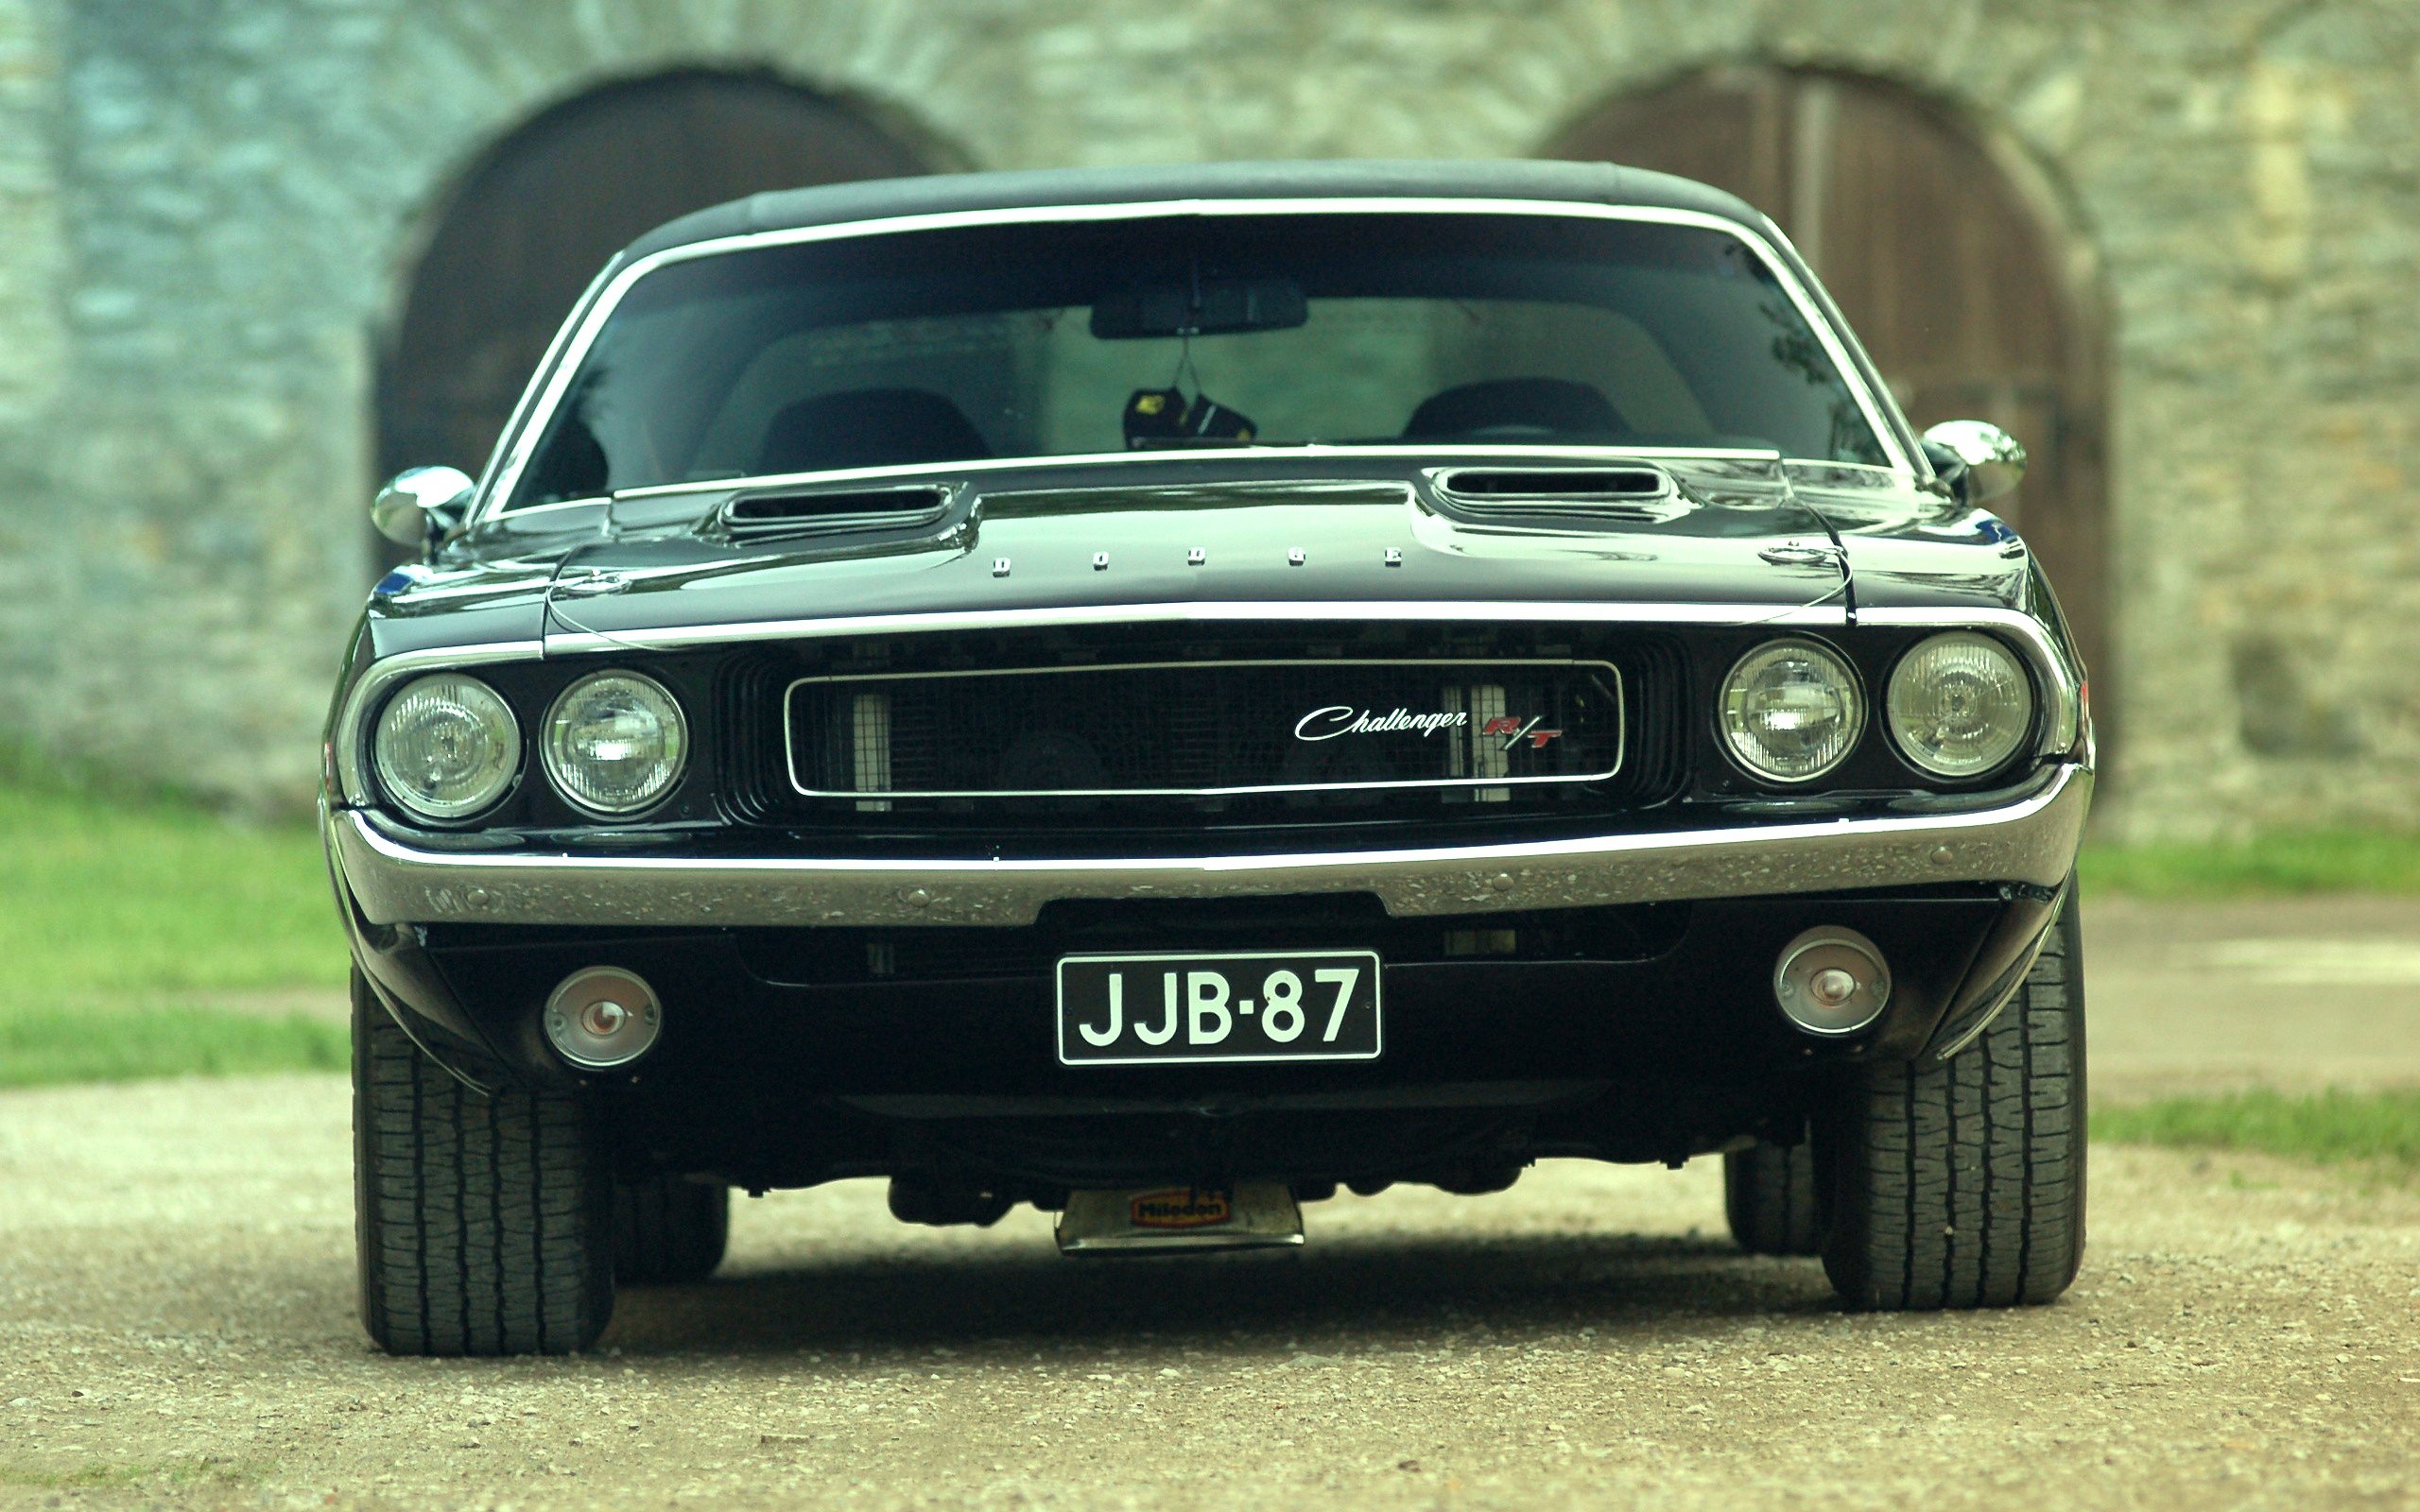 2560x1600 Download-Muscle-Car-Image-Free